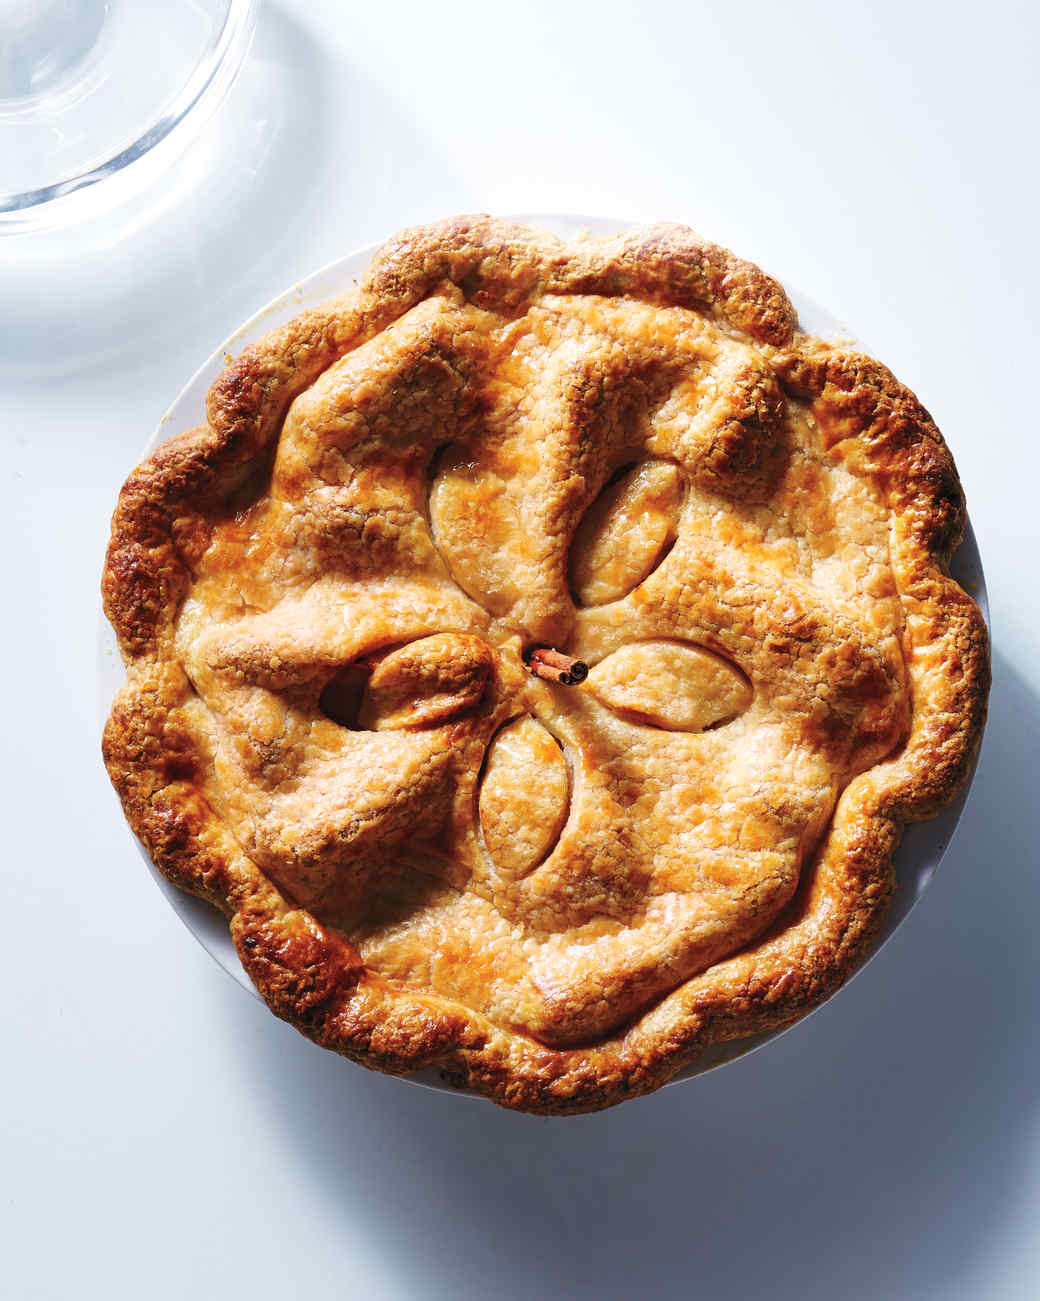 Pear-and-Lemon Pie with Pate Brisee Crust